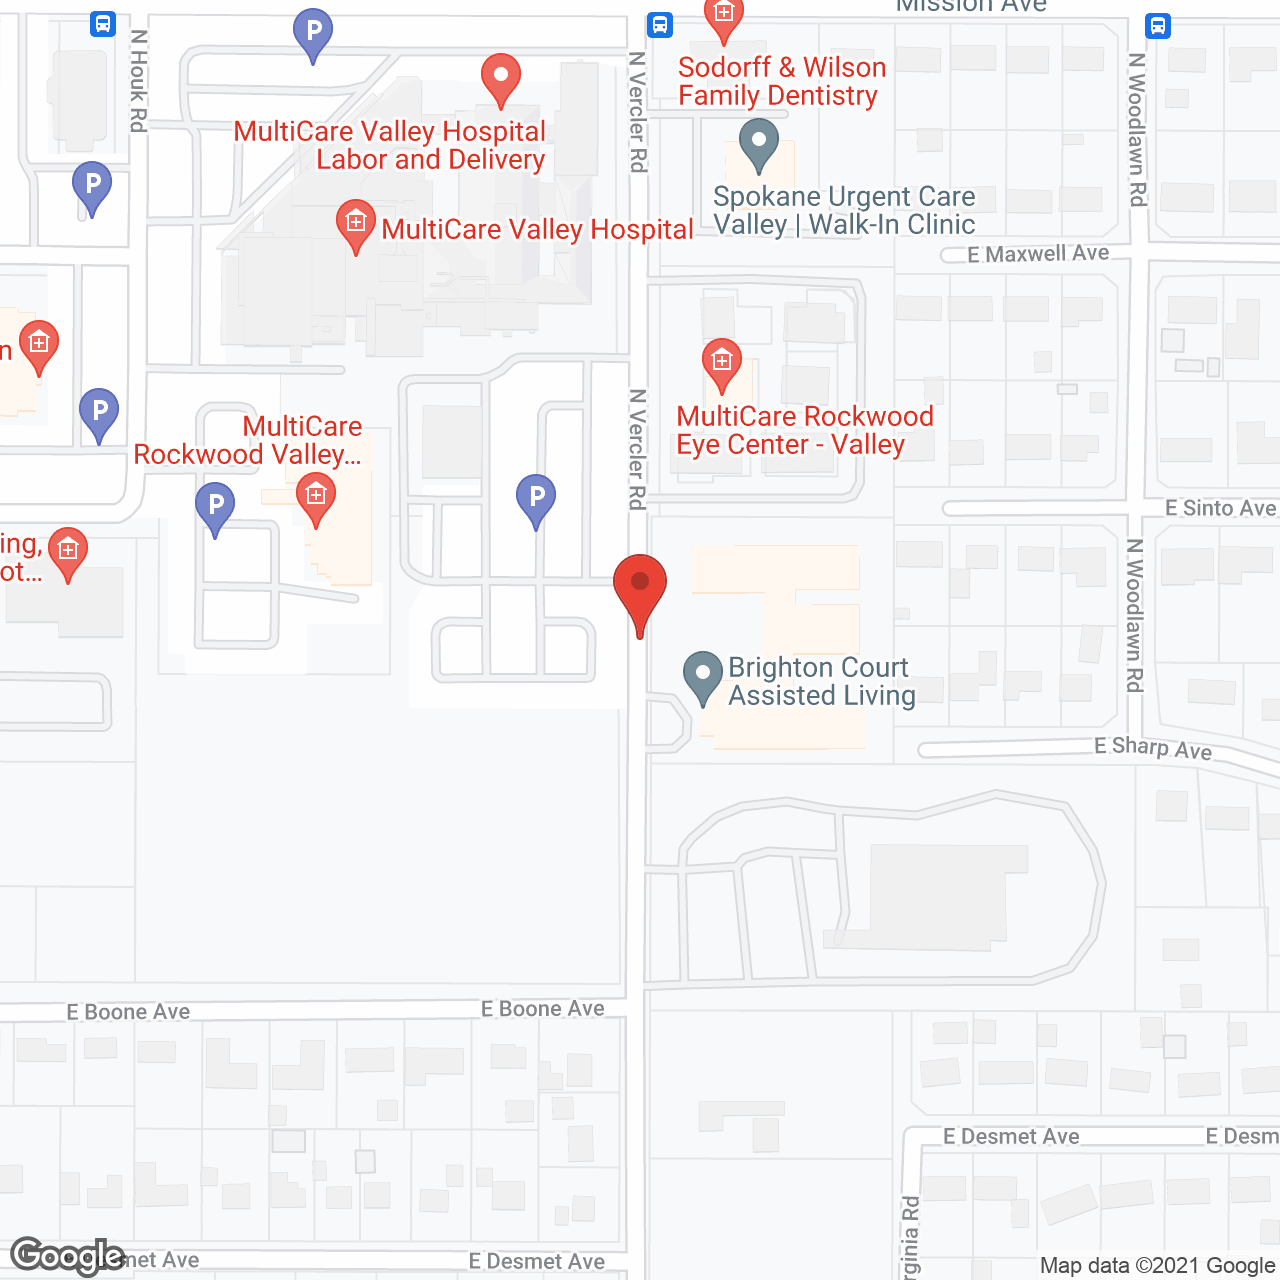 Brighton Court Assisted Living in google map